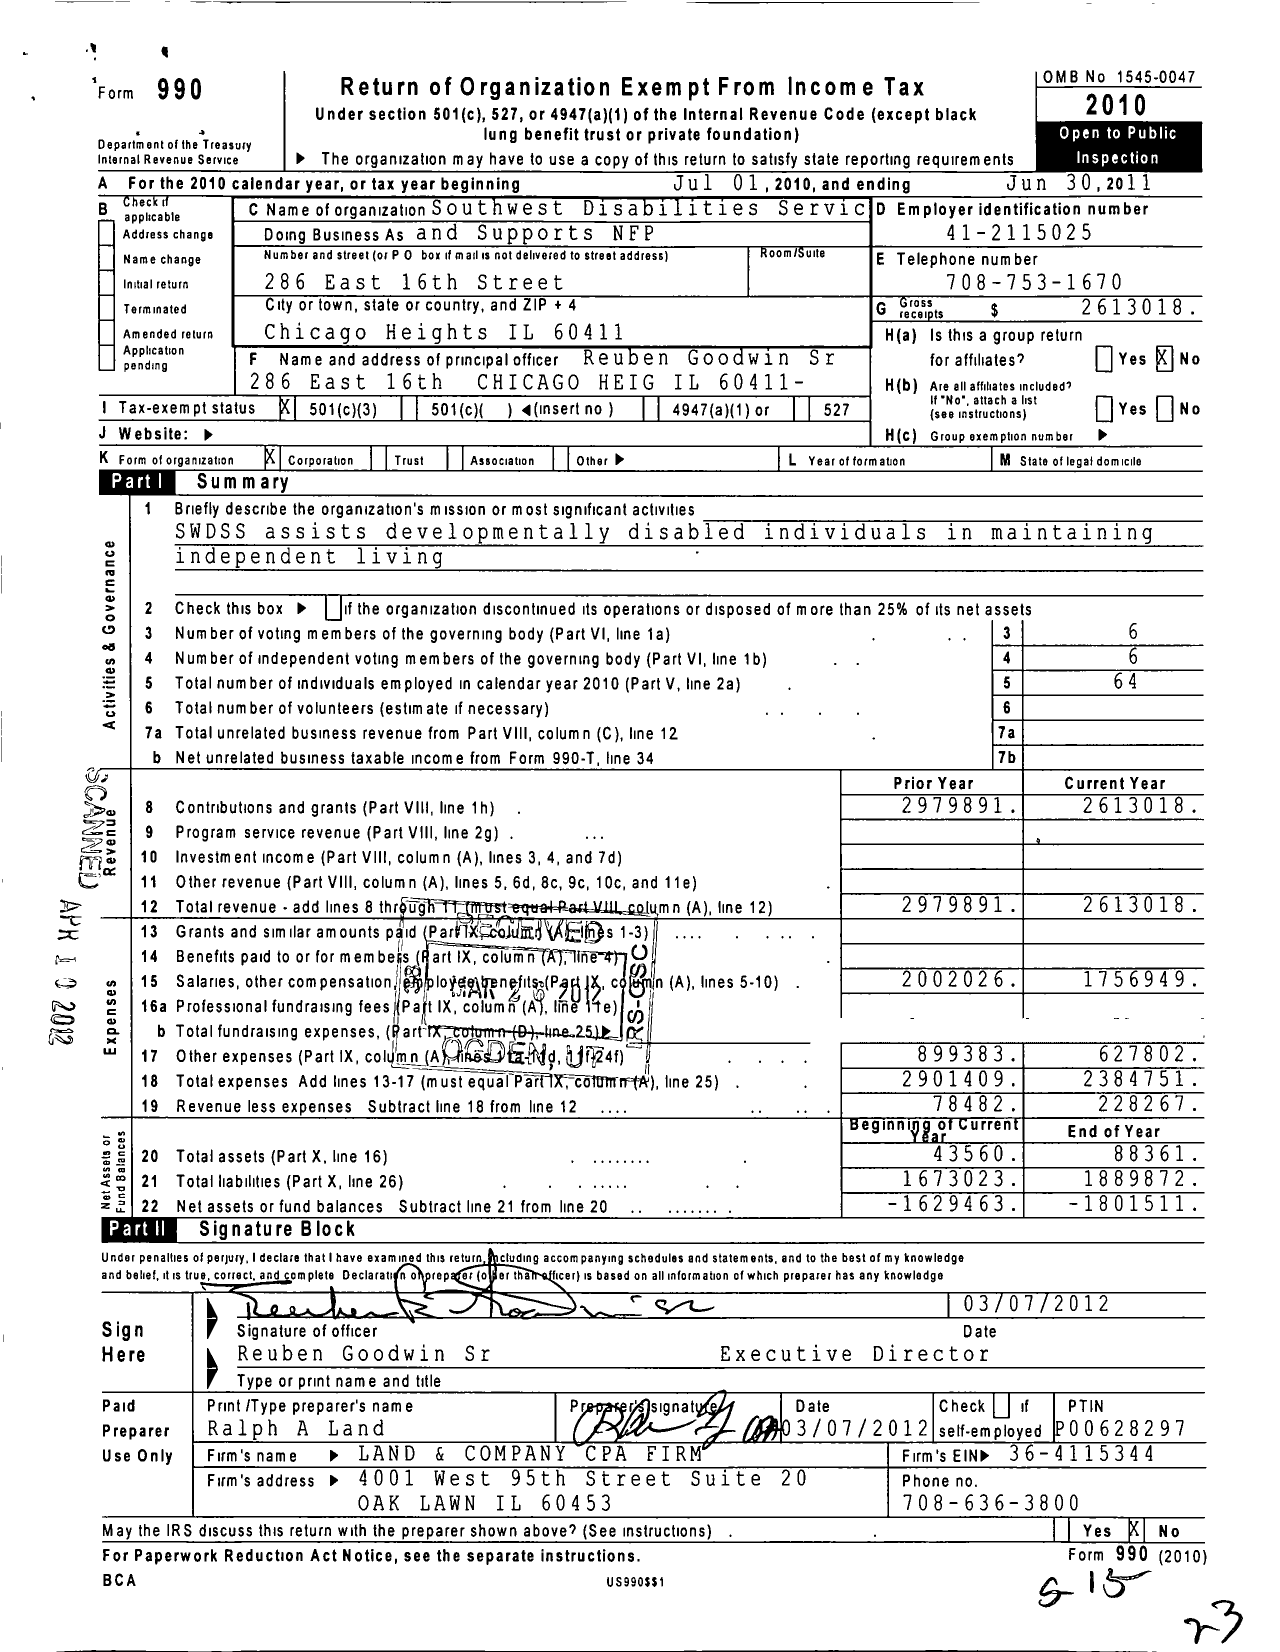 Image of first page of 2010 Form 990 for Southwest Disabilities Services and Supports NFP